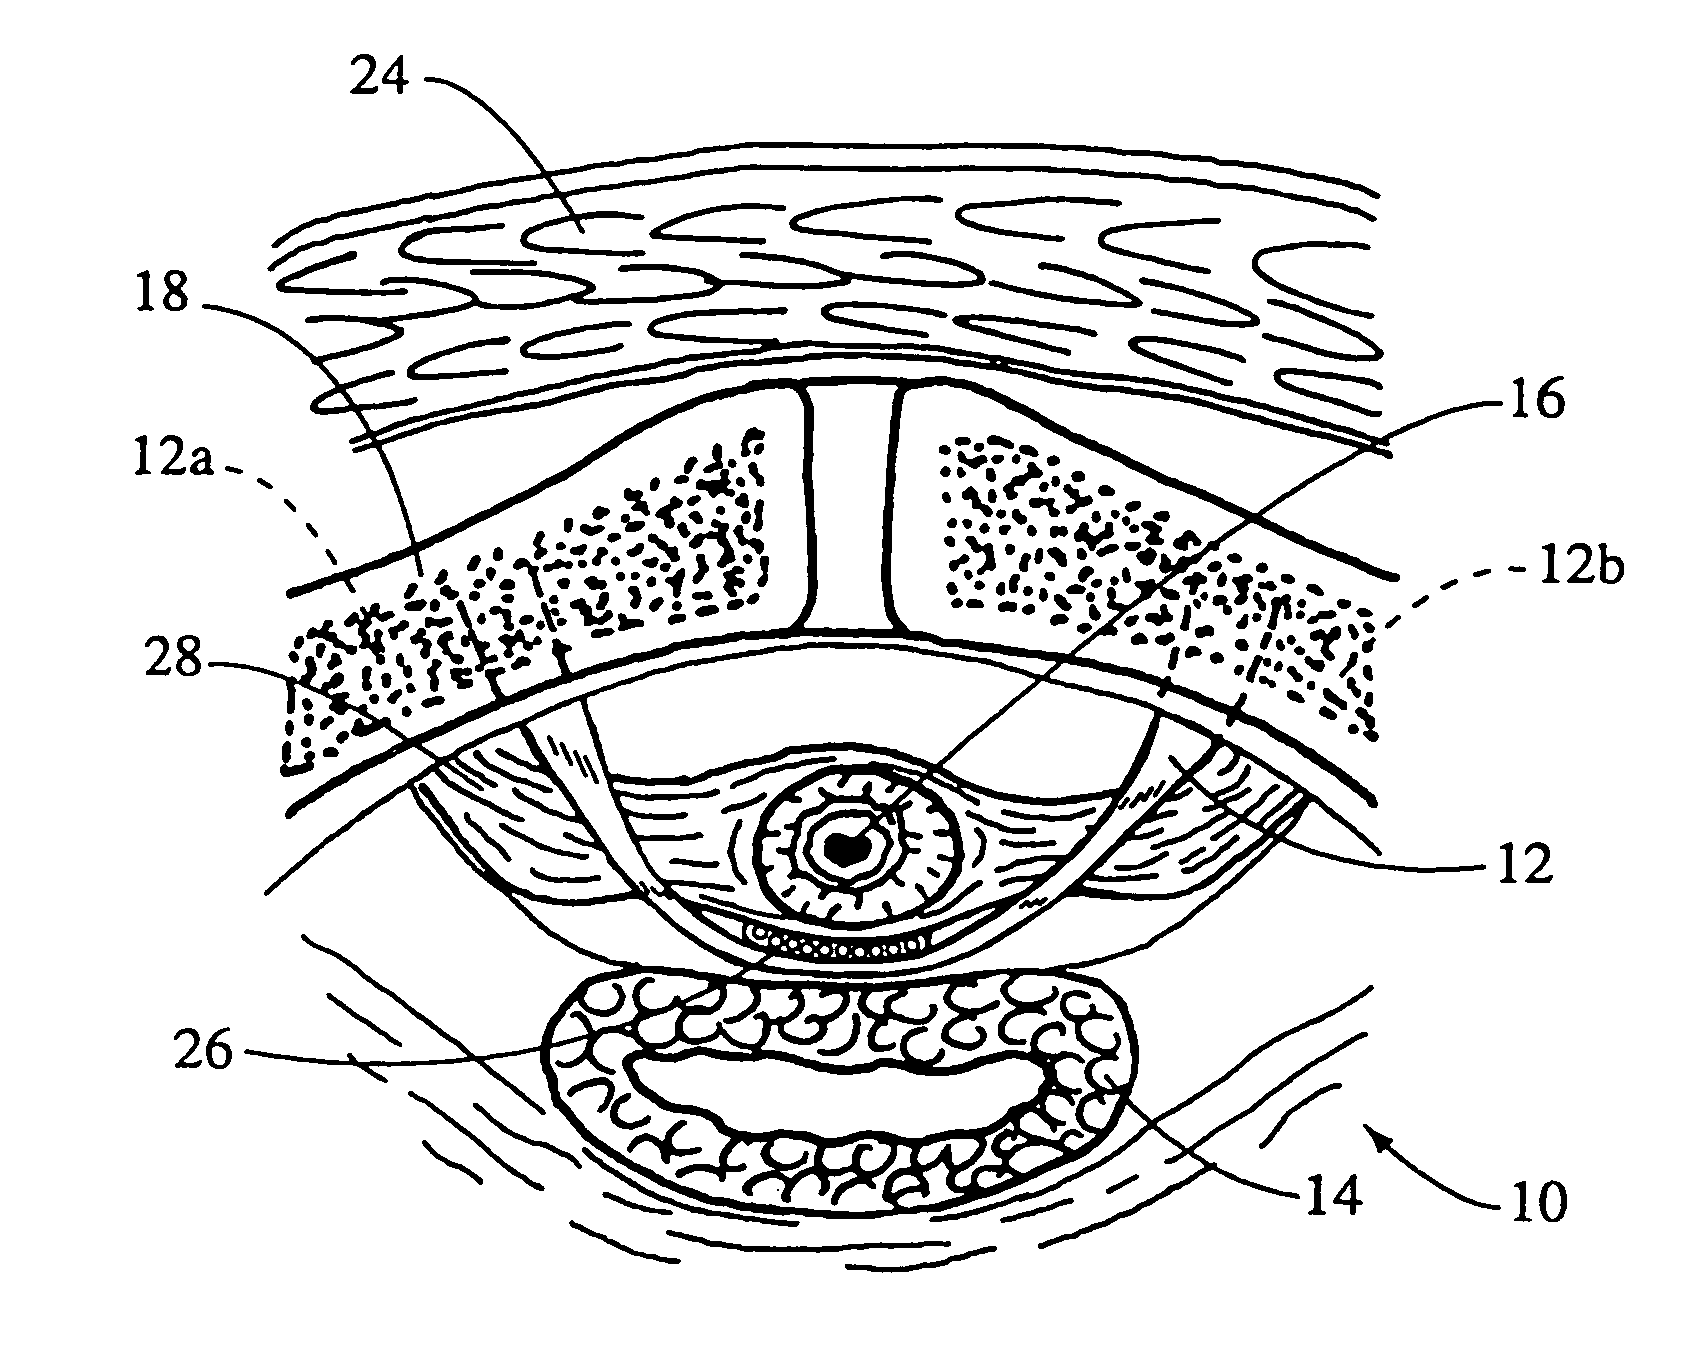 System and method for securing implants to soft tissue